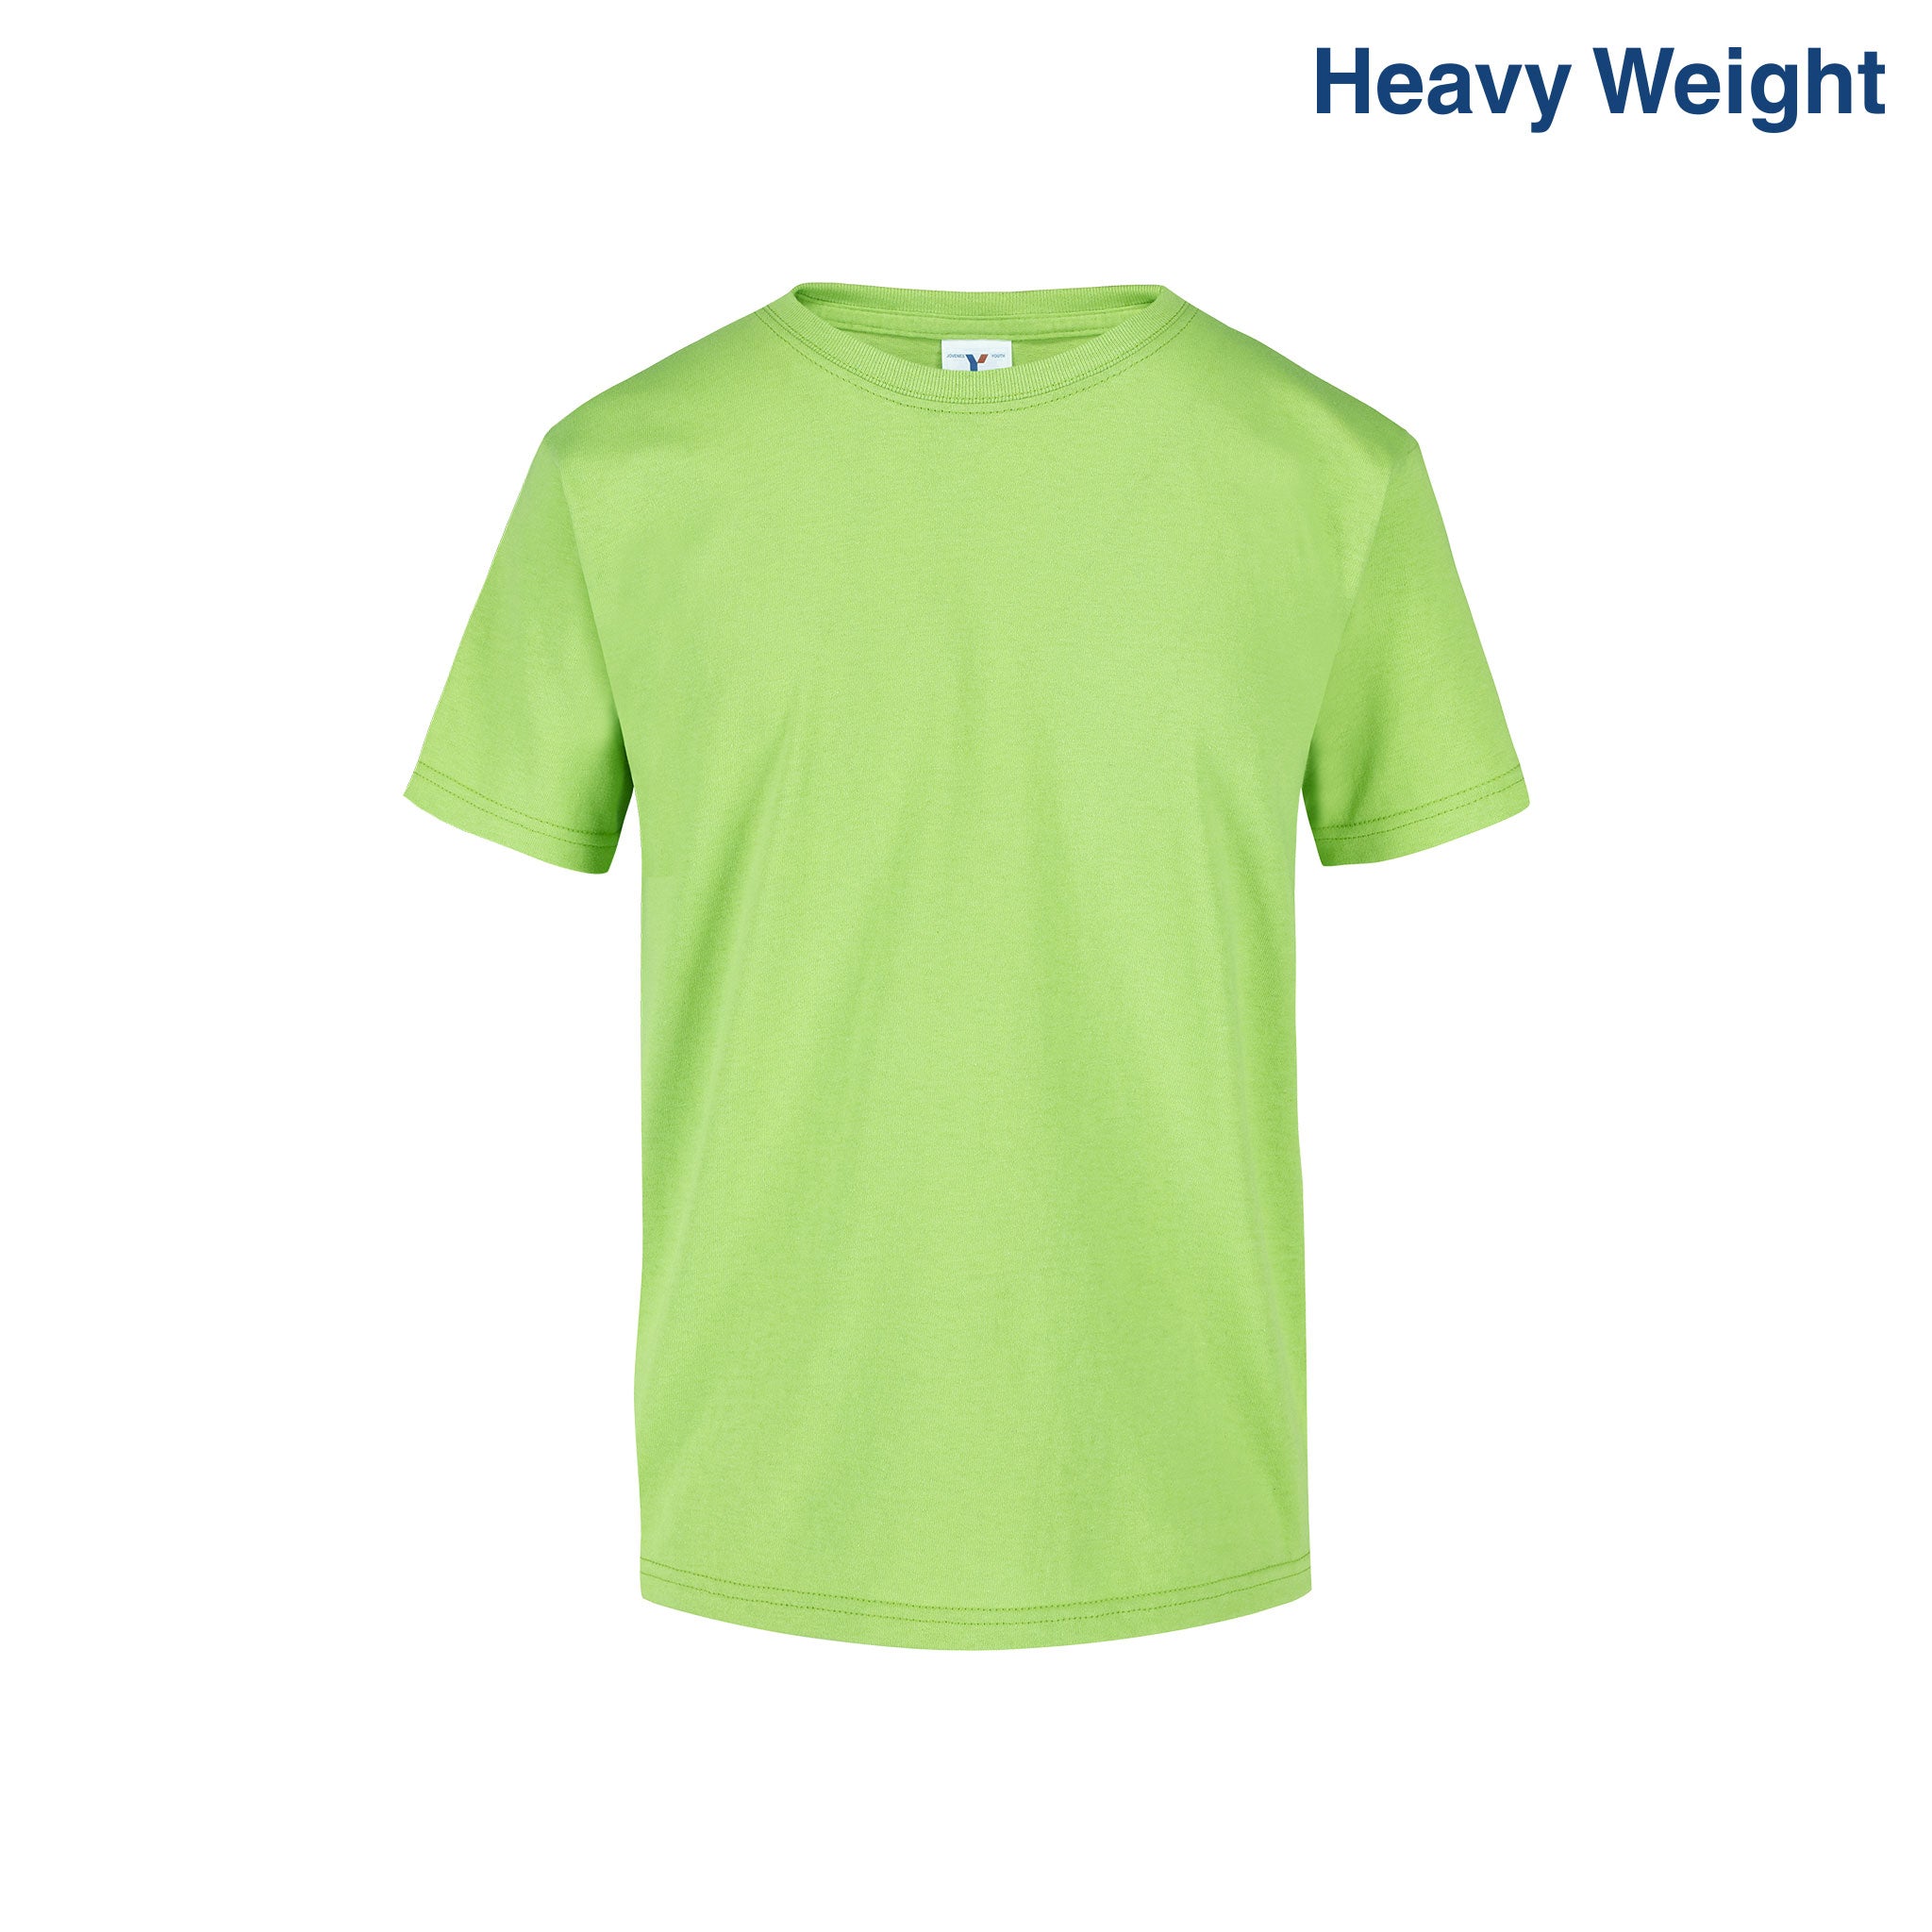 Youth's Heavy Weight Crew Neck Short Sleeve T-Shirt (Lime 